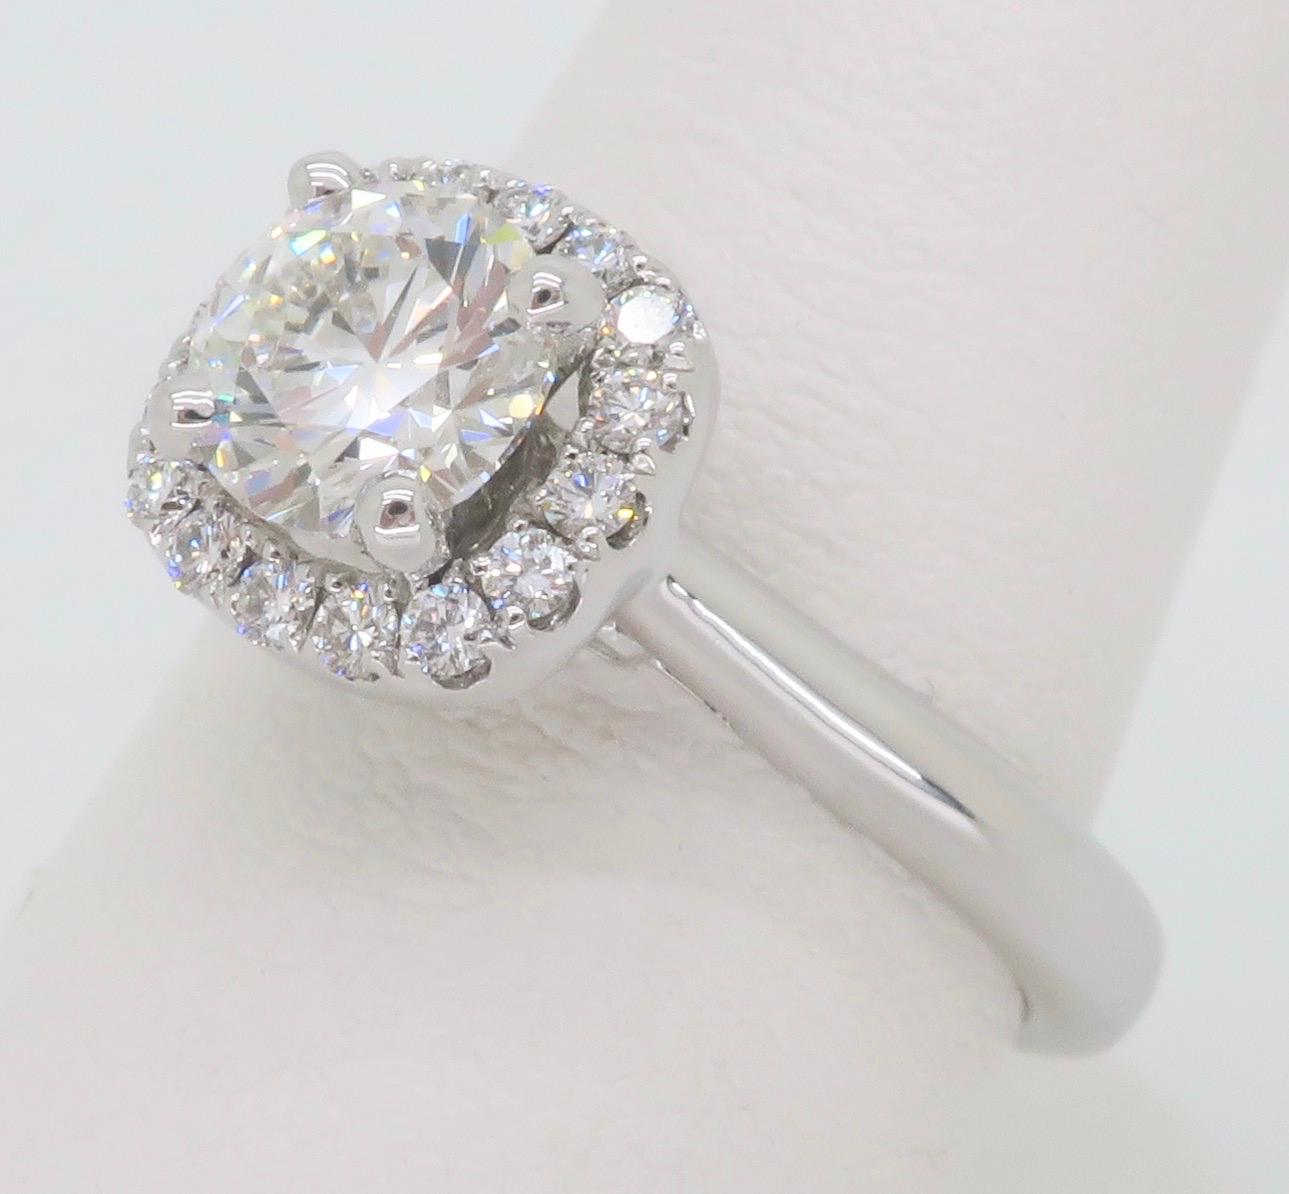 Women's or Men's GIA Certified Round Brilliant Cut Diamond in a Stunning Scott Kay Halo Setting  For Sale